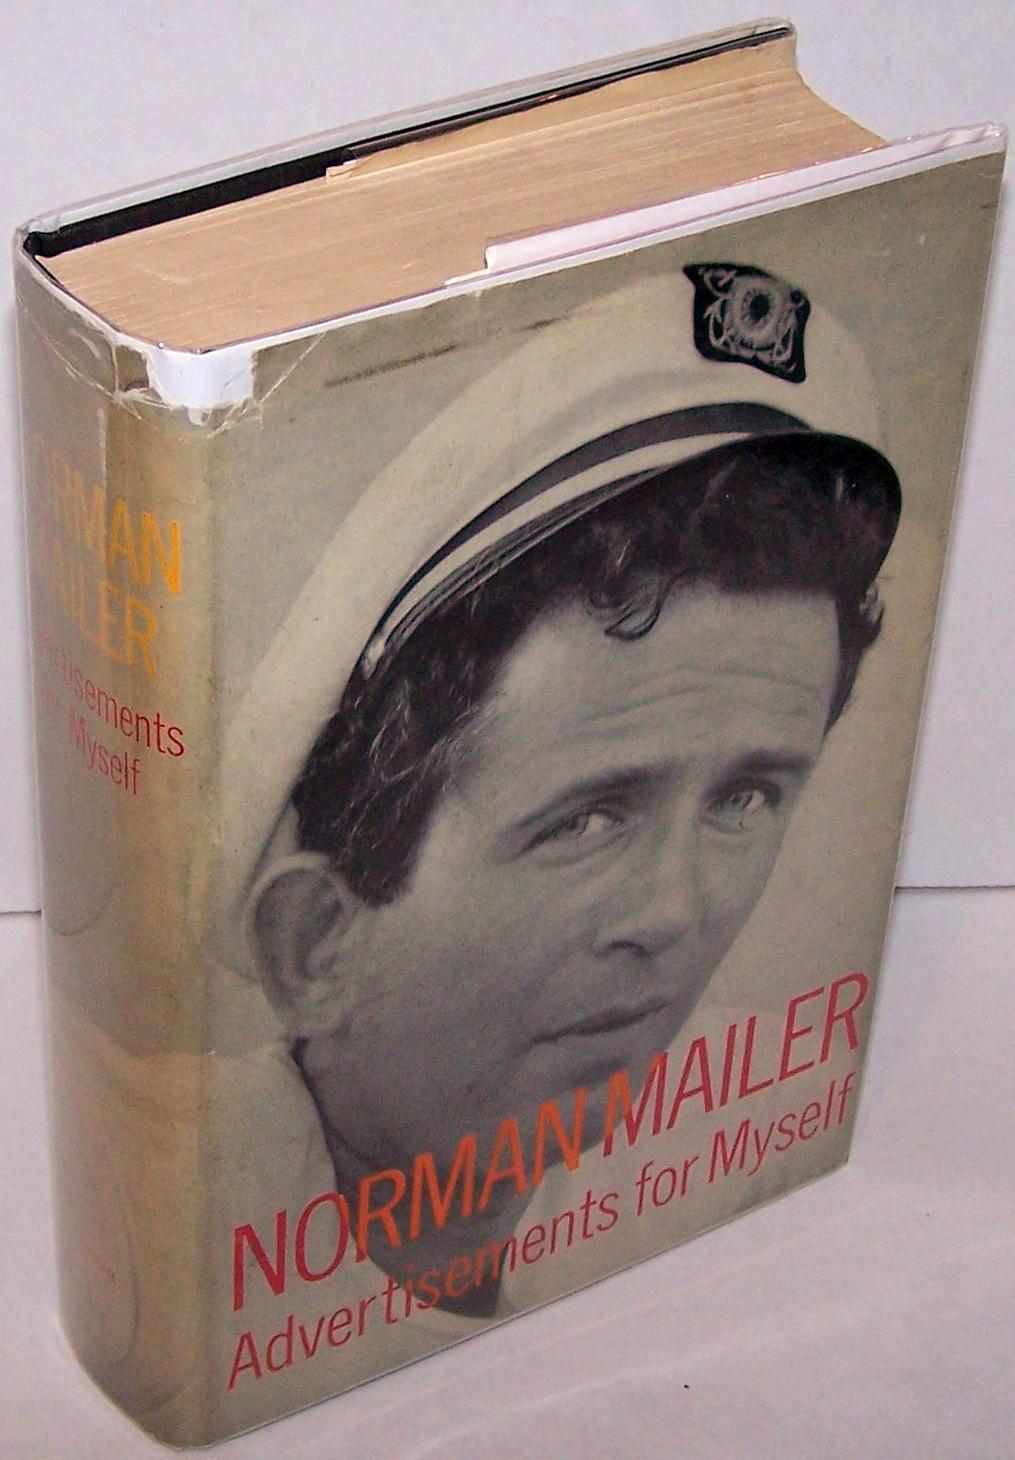 Advertisements For Myself Advanced Review Copy Flat Signed By Norman Mailer Very Good